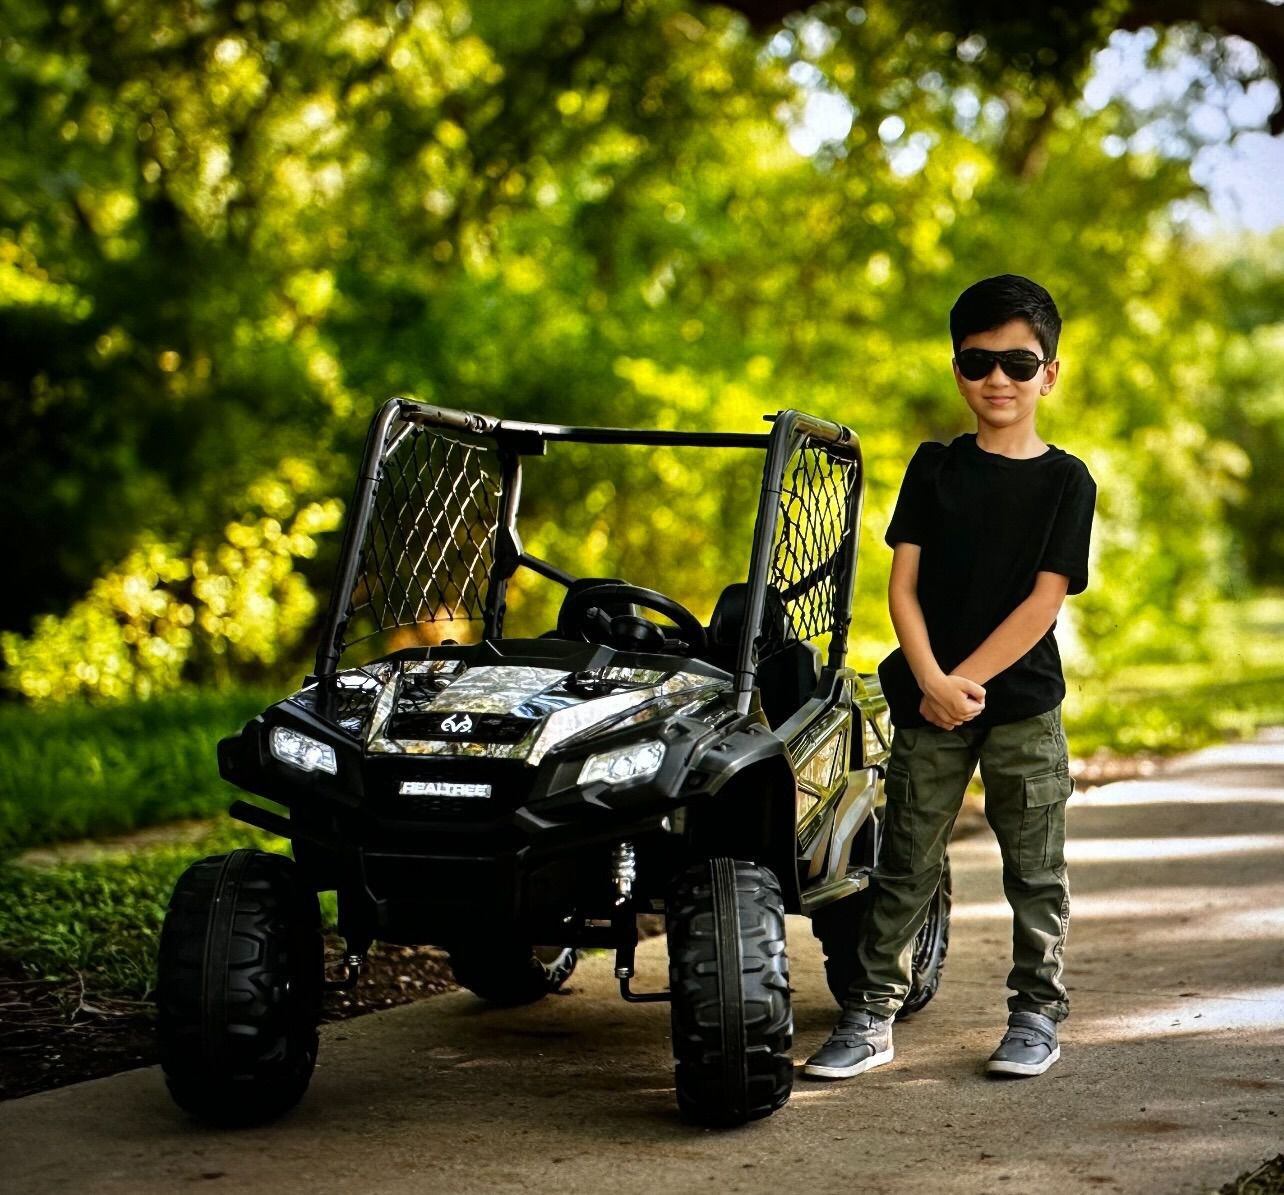 Dallas-based Best Ride on Cars popular vehicle, the Realtree XD 24V, is sold at Walmart for...